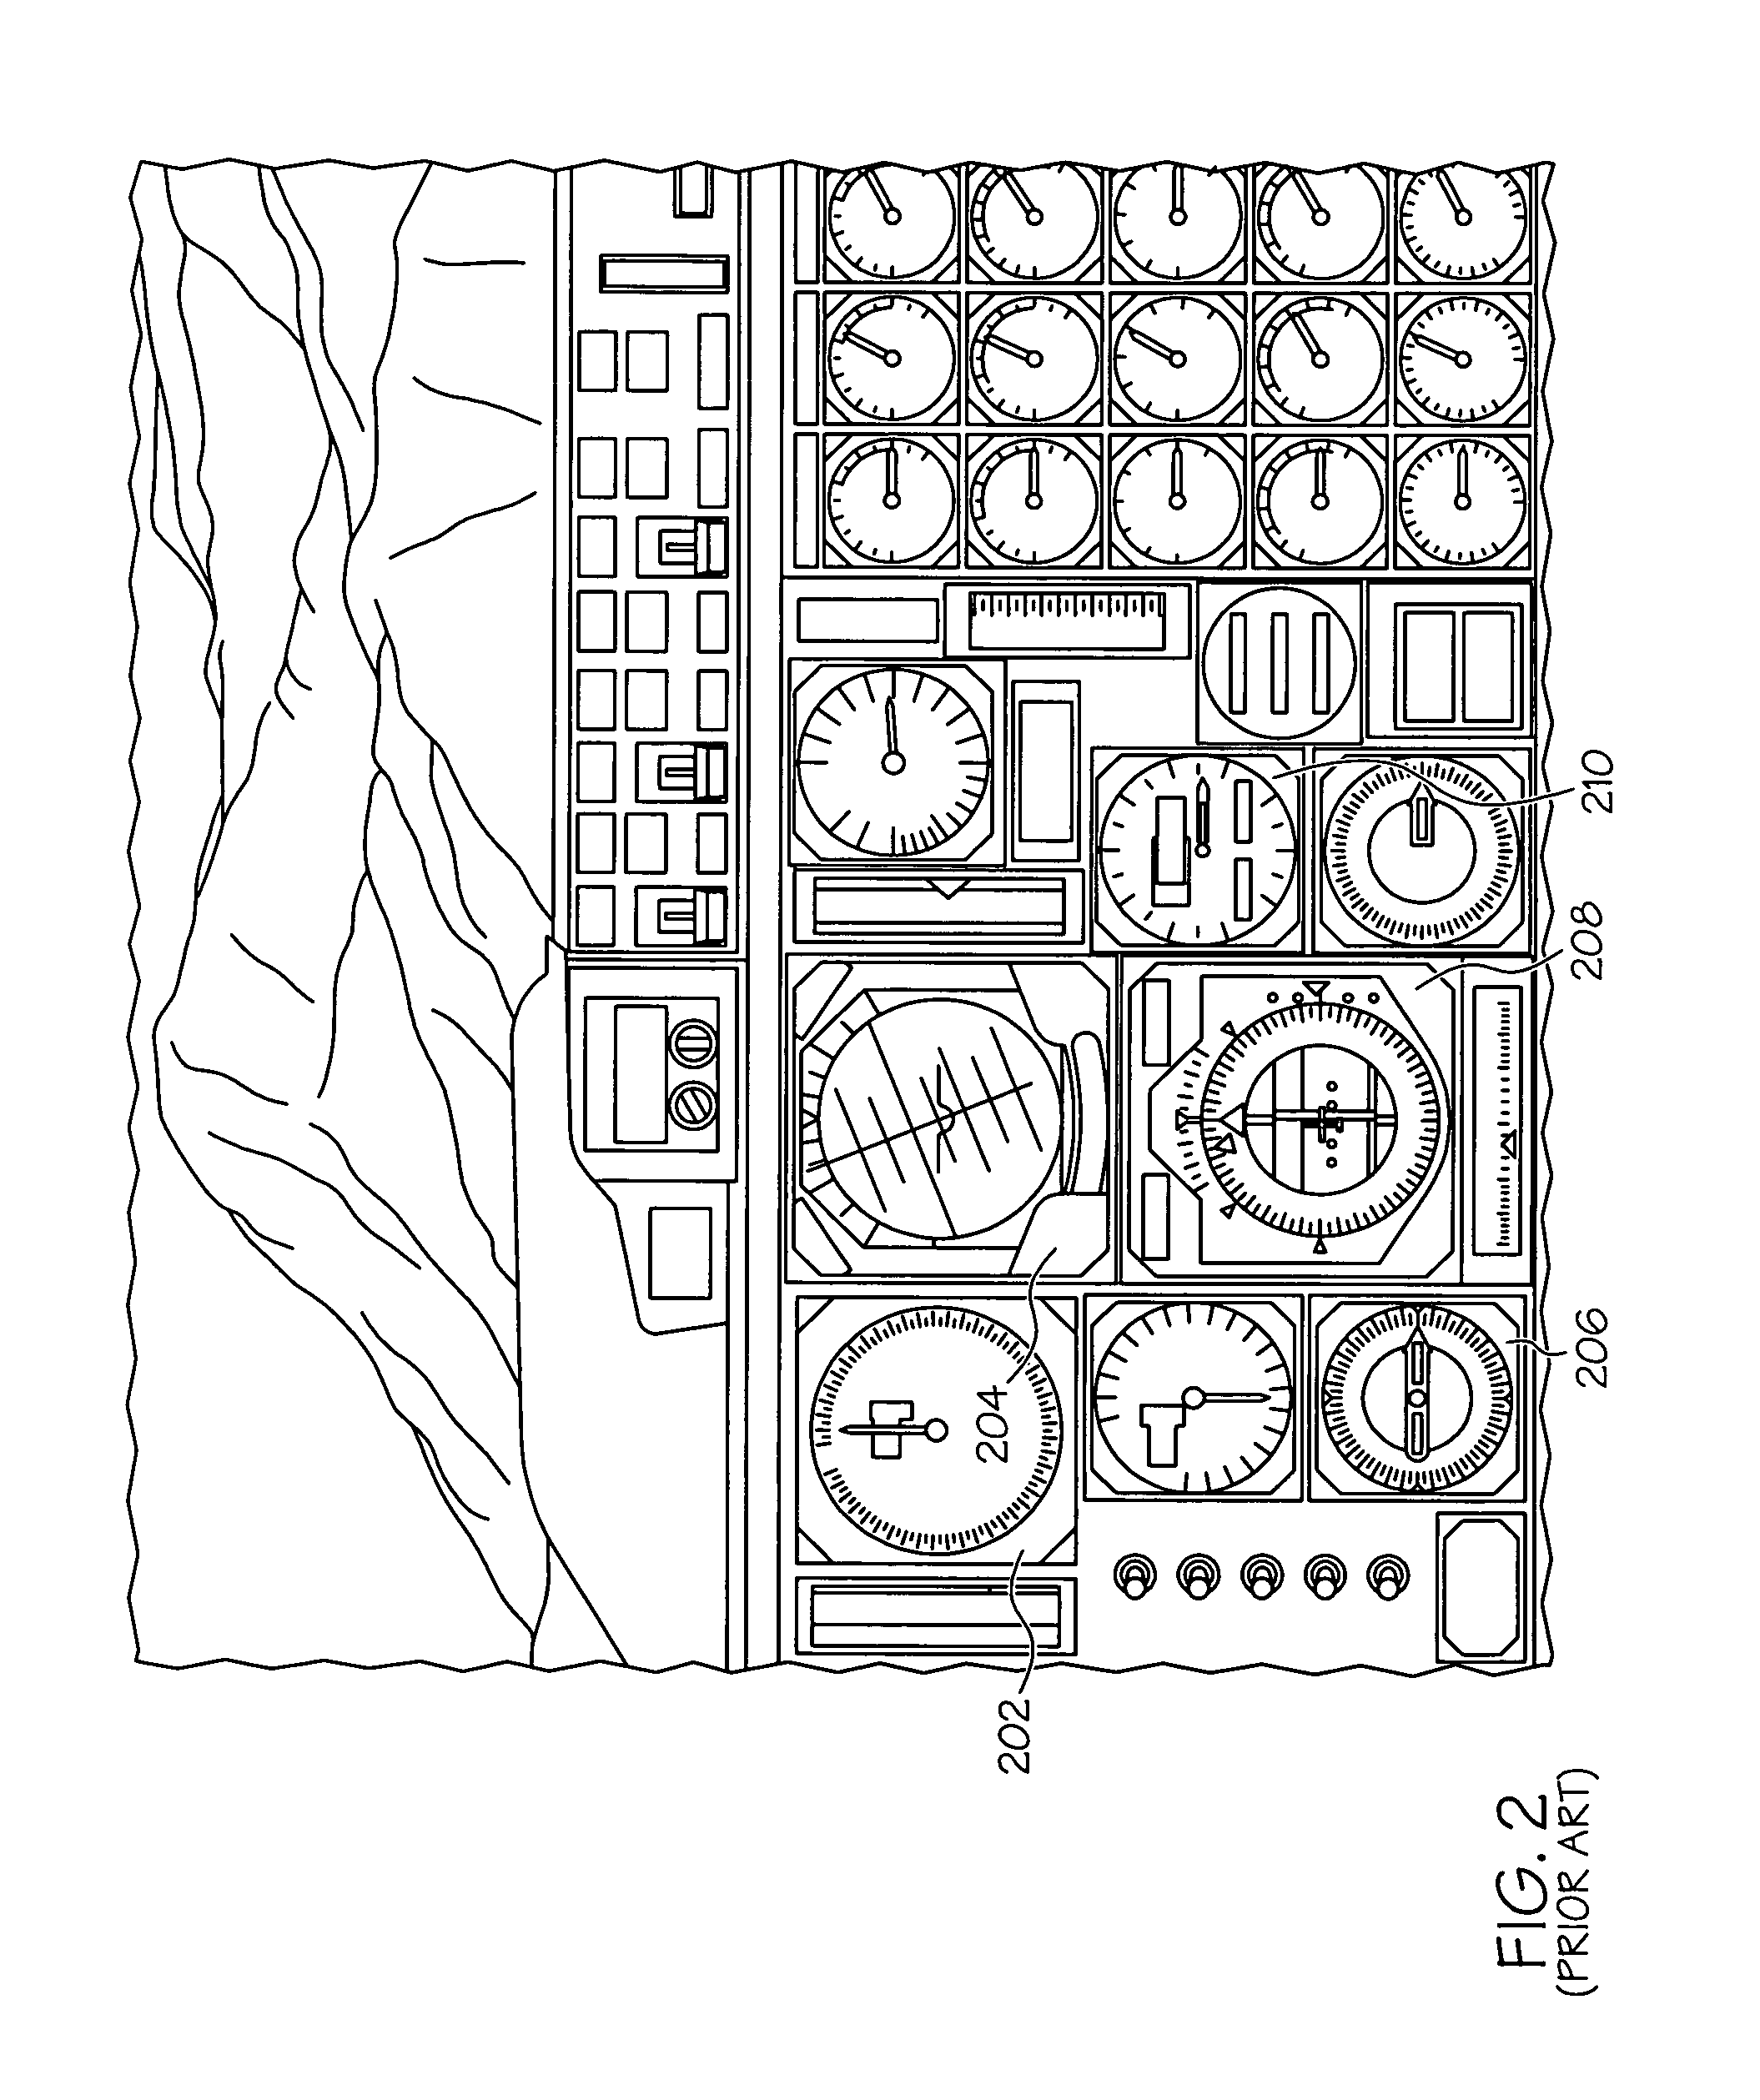 Method and apparatus for automatic display and removal of required synoptic pages in a checklist context